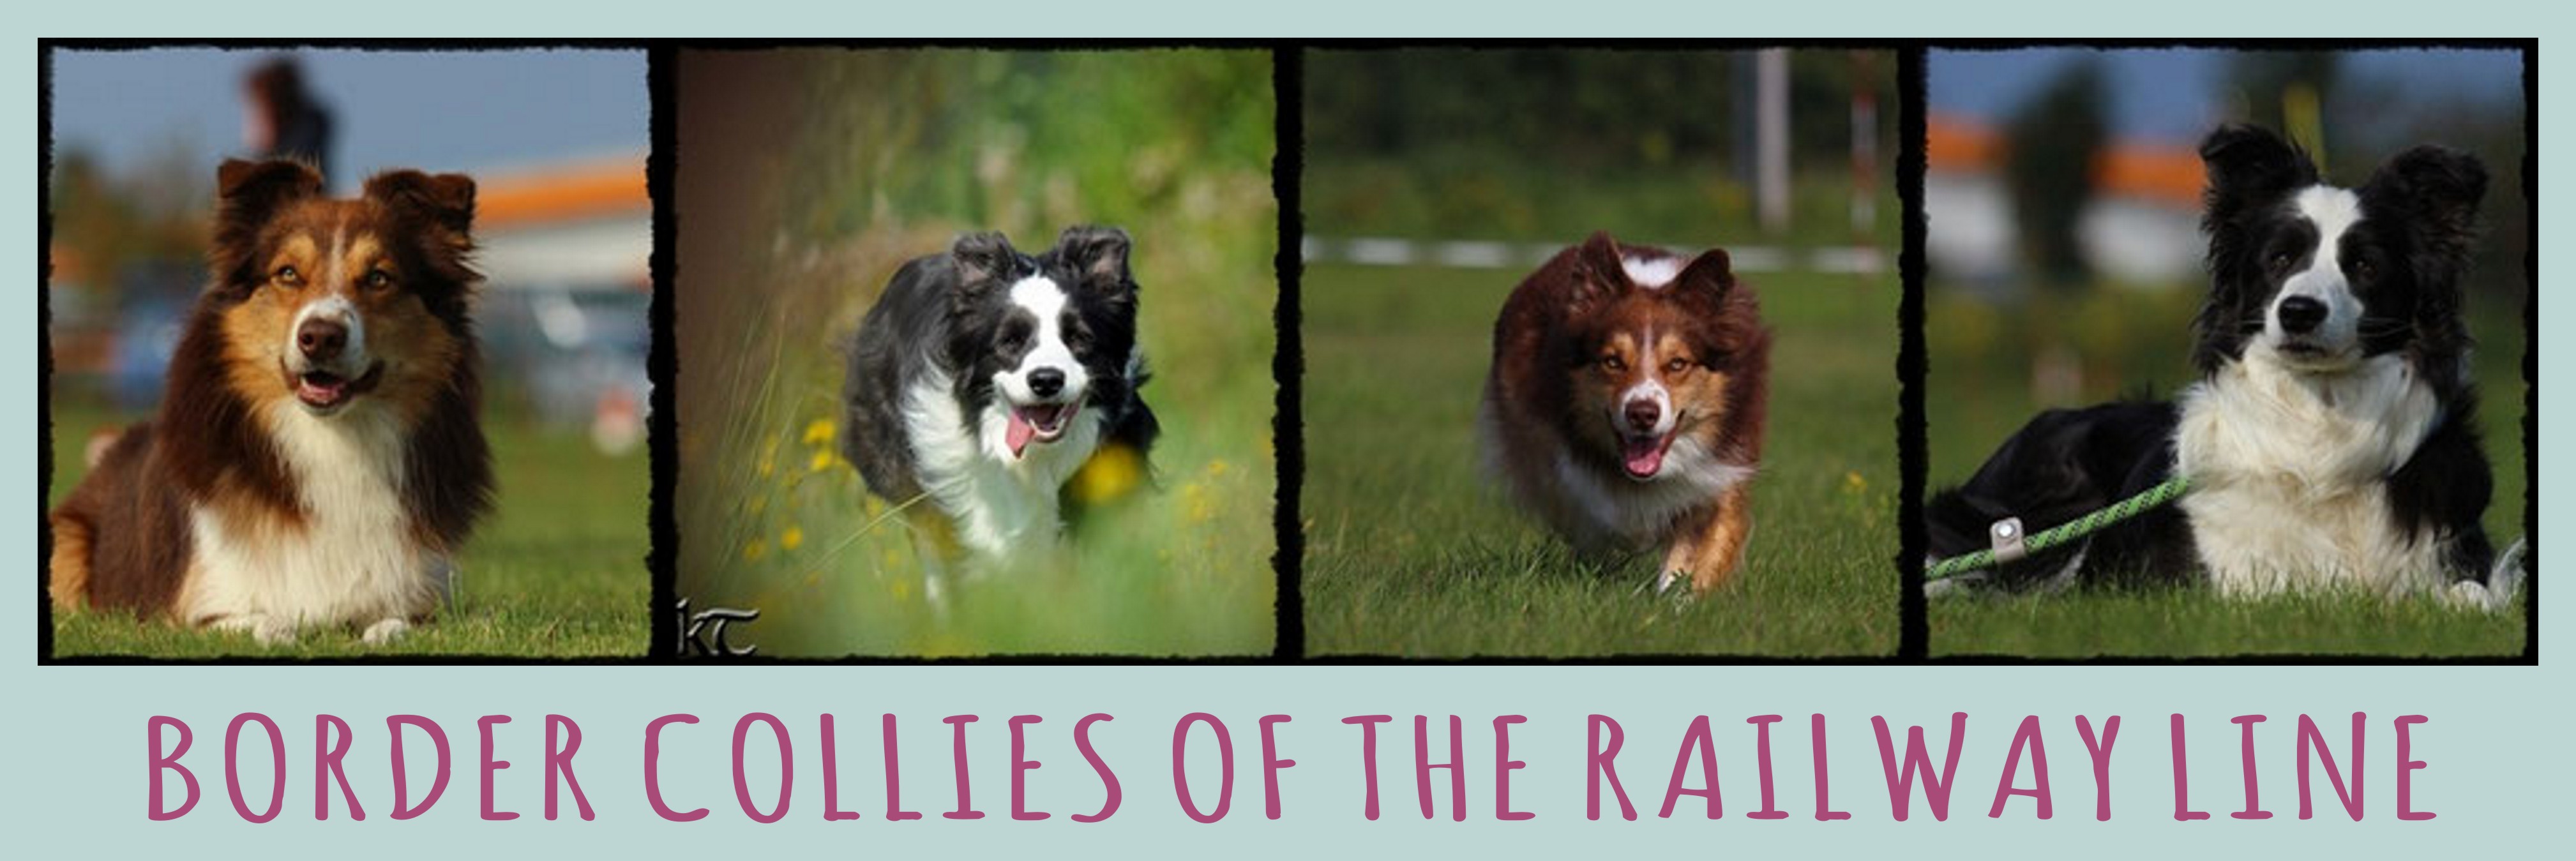 Banner Border Collies of the Railway Line